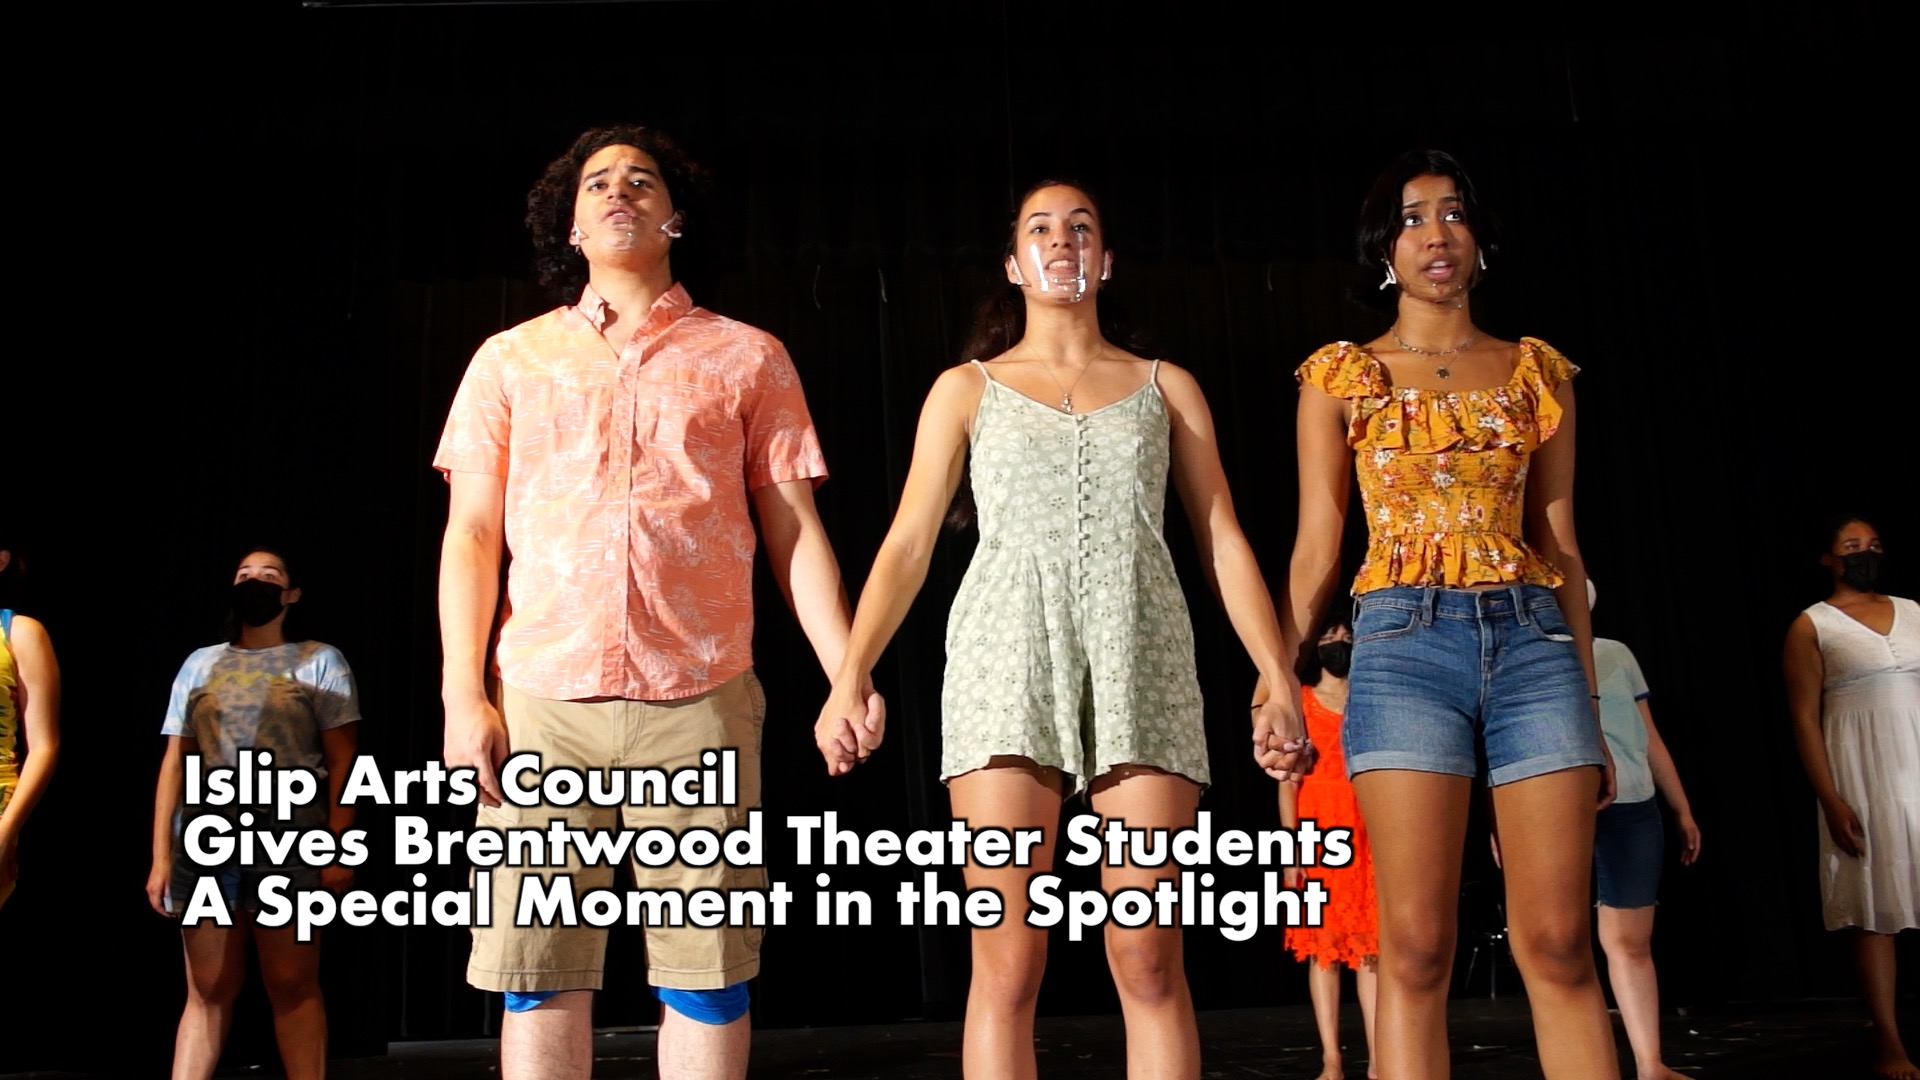 Islip Arts Council Gives Brentwood Theater Students A Special Moment in The Spotlight